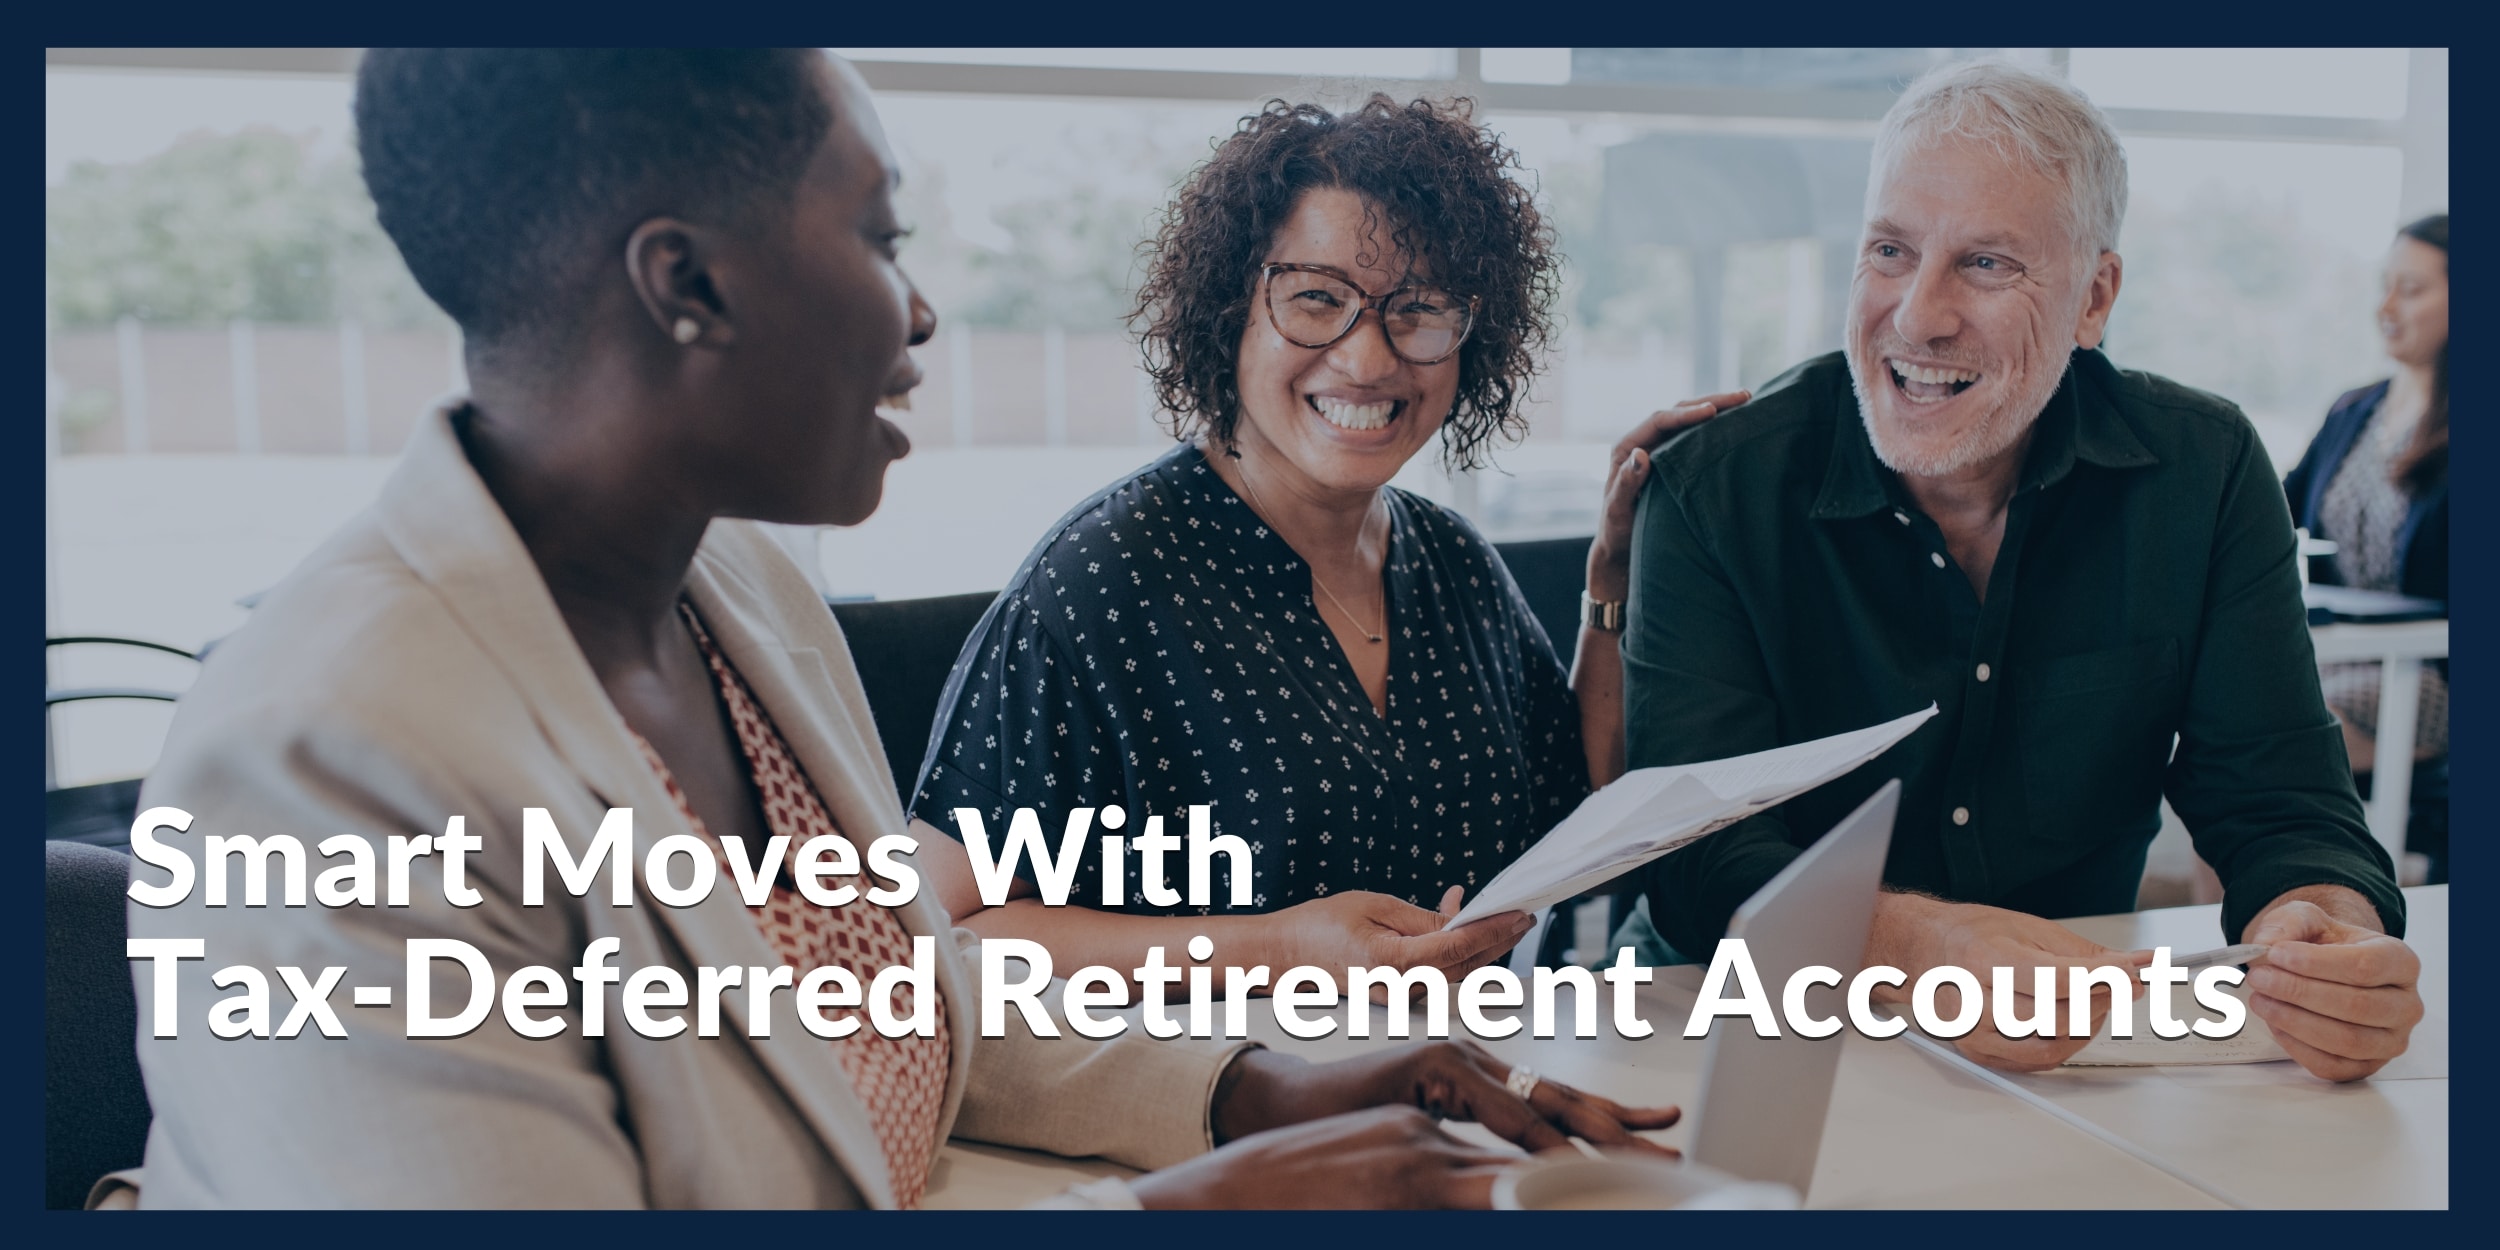 Smart Moves With Tax-Deferred Retirement Accounts